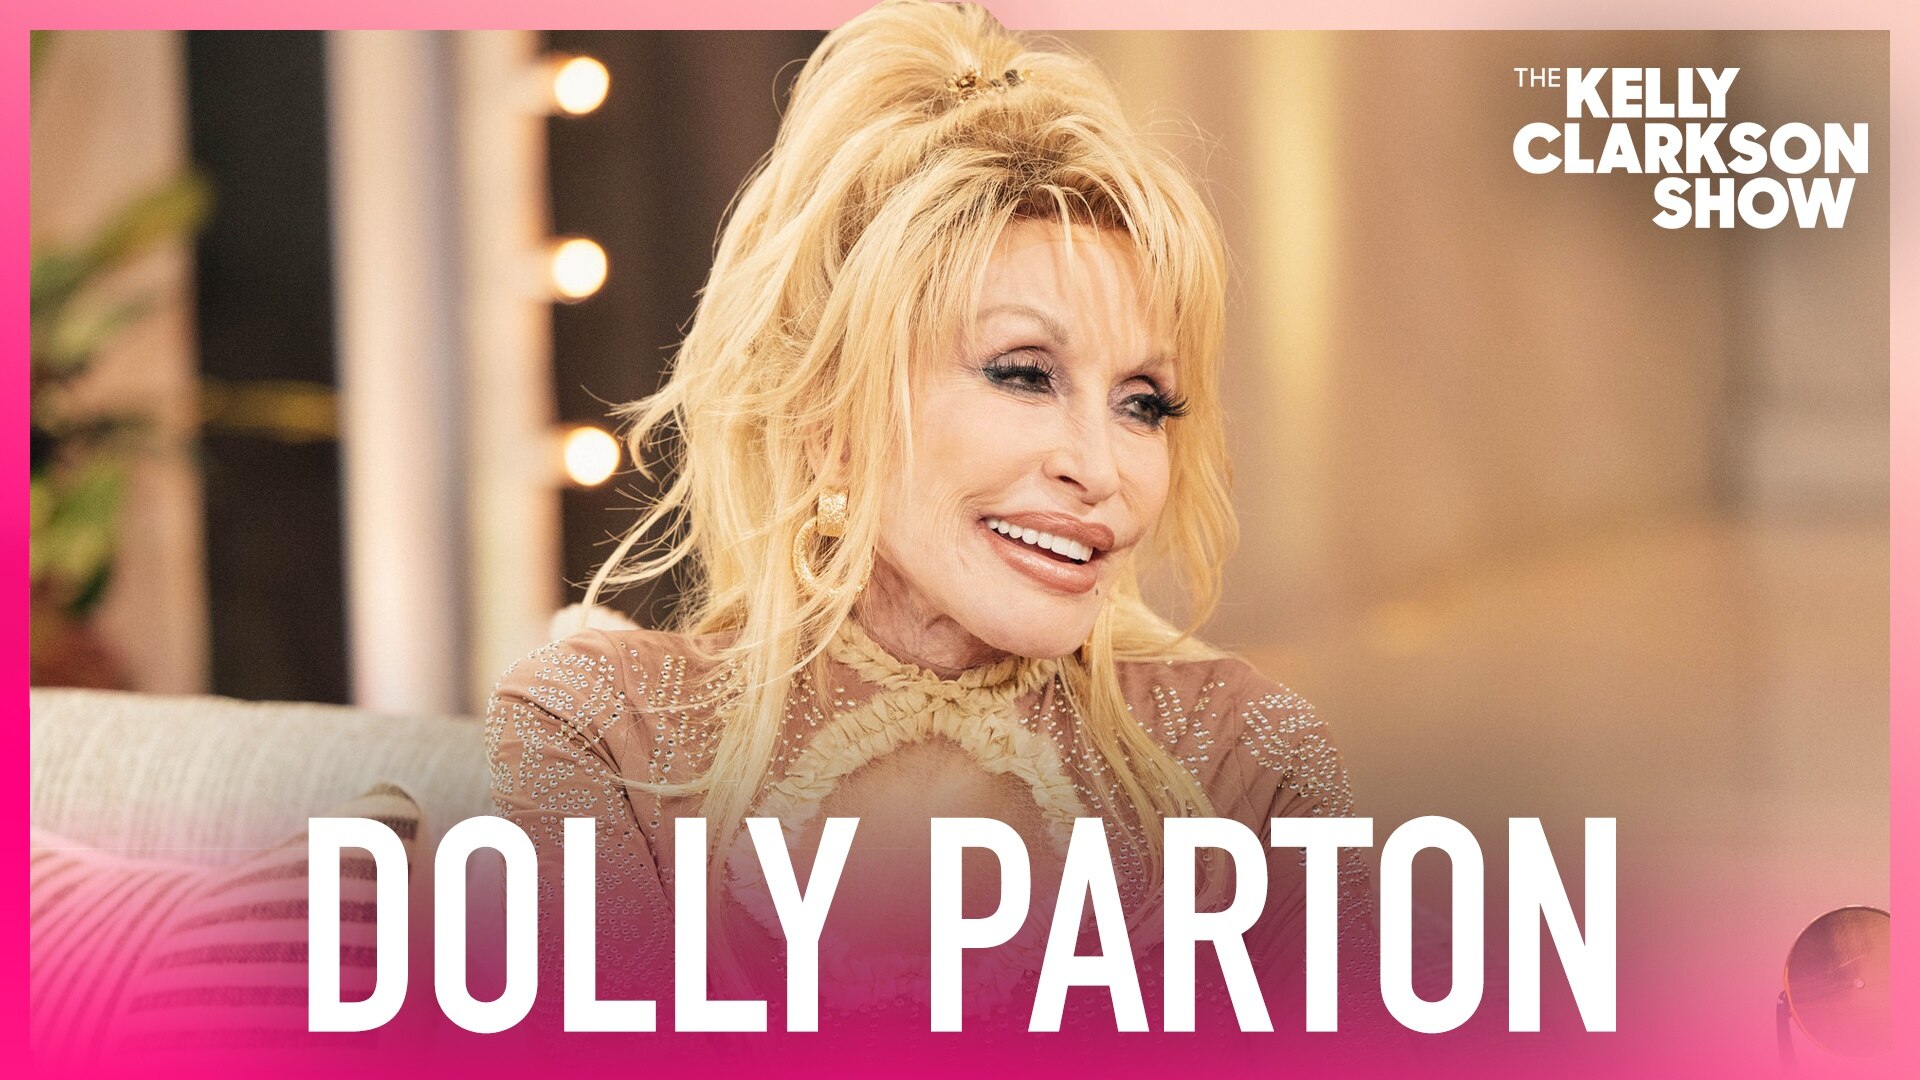 Watch The Kelly Clarkson Show Official Website Highlight Dolly